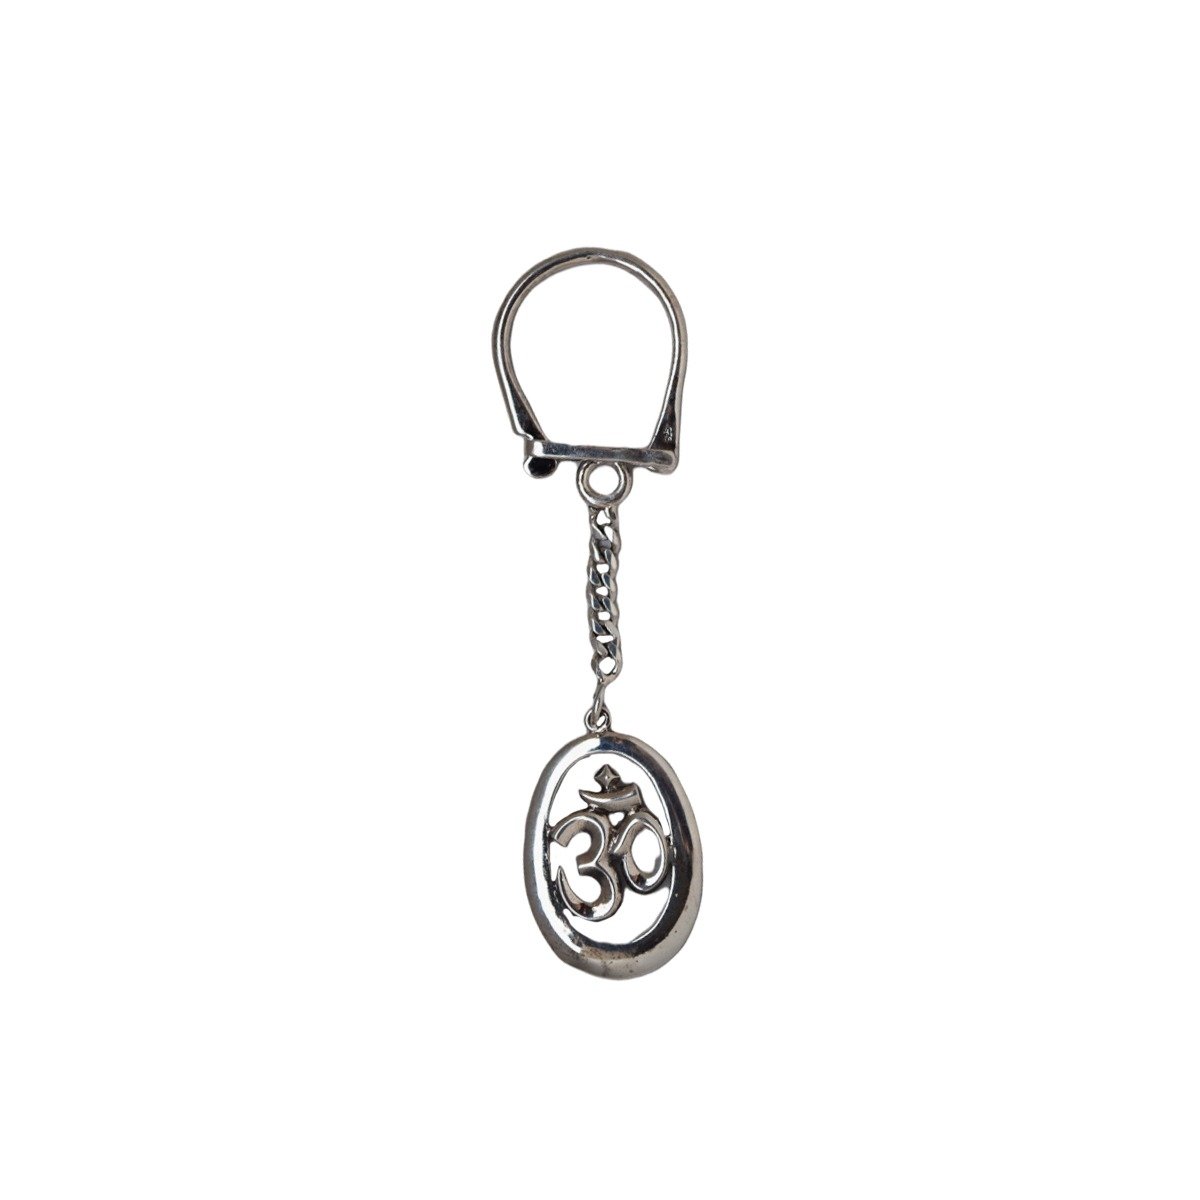 92.5 PURE SILVER OM DESIGN KEYCHAIN OVAL SHAPED